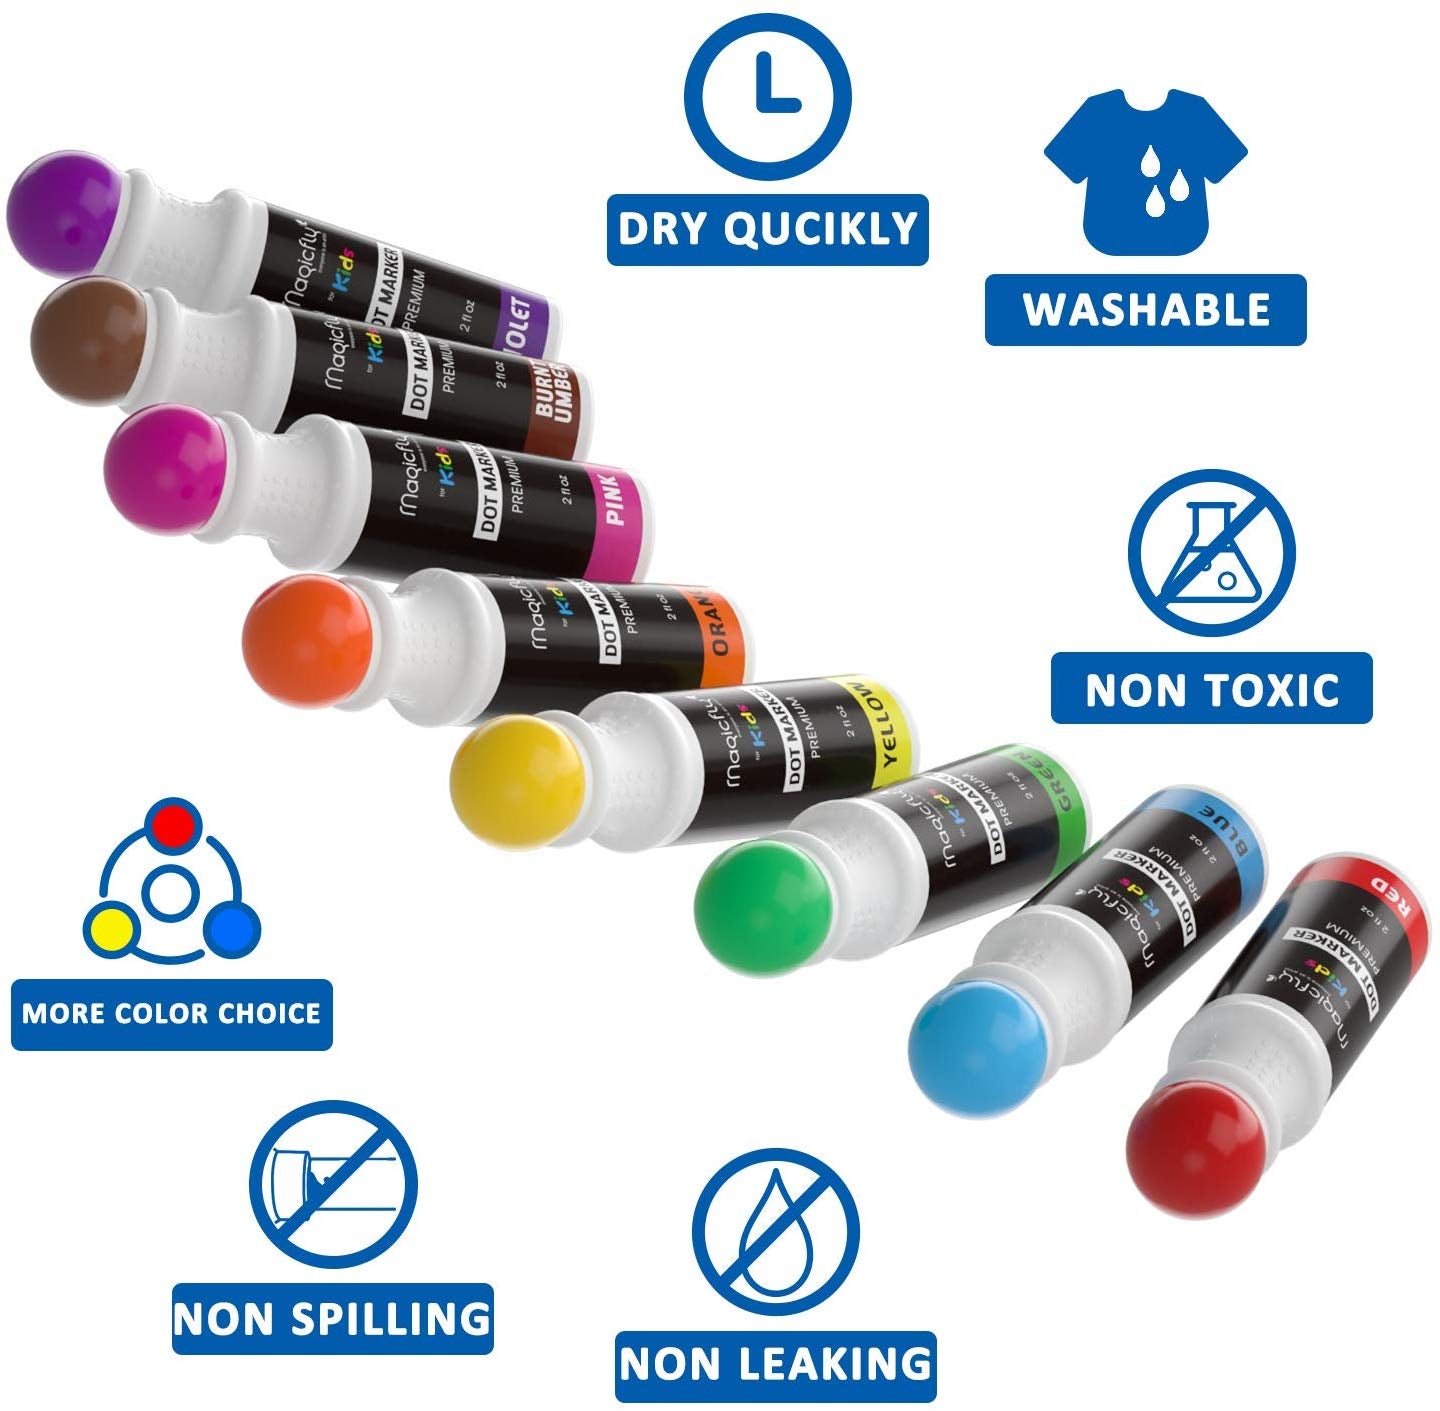 Buy KEFF Washable Dot Markers for Kids and Toddlers - 8 Colors